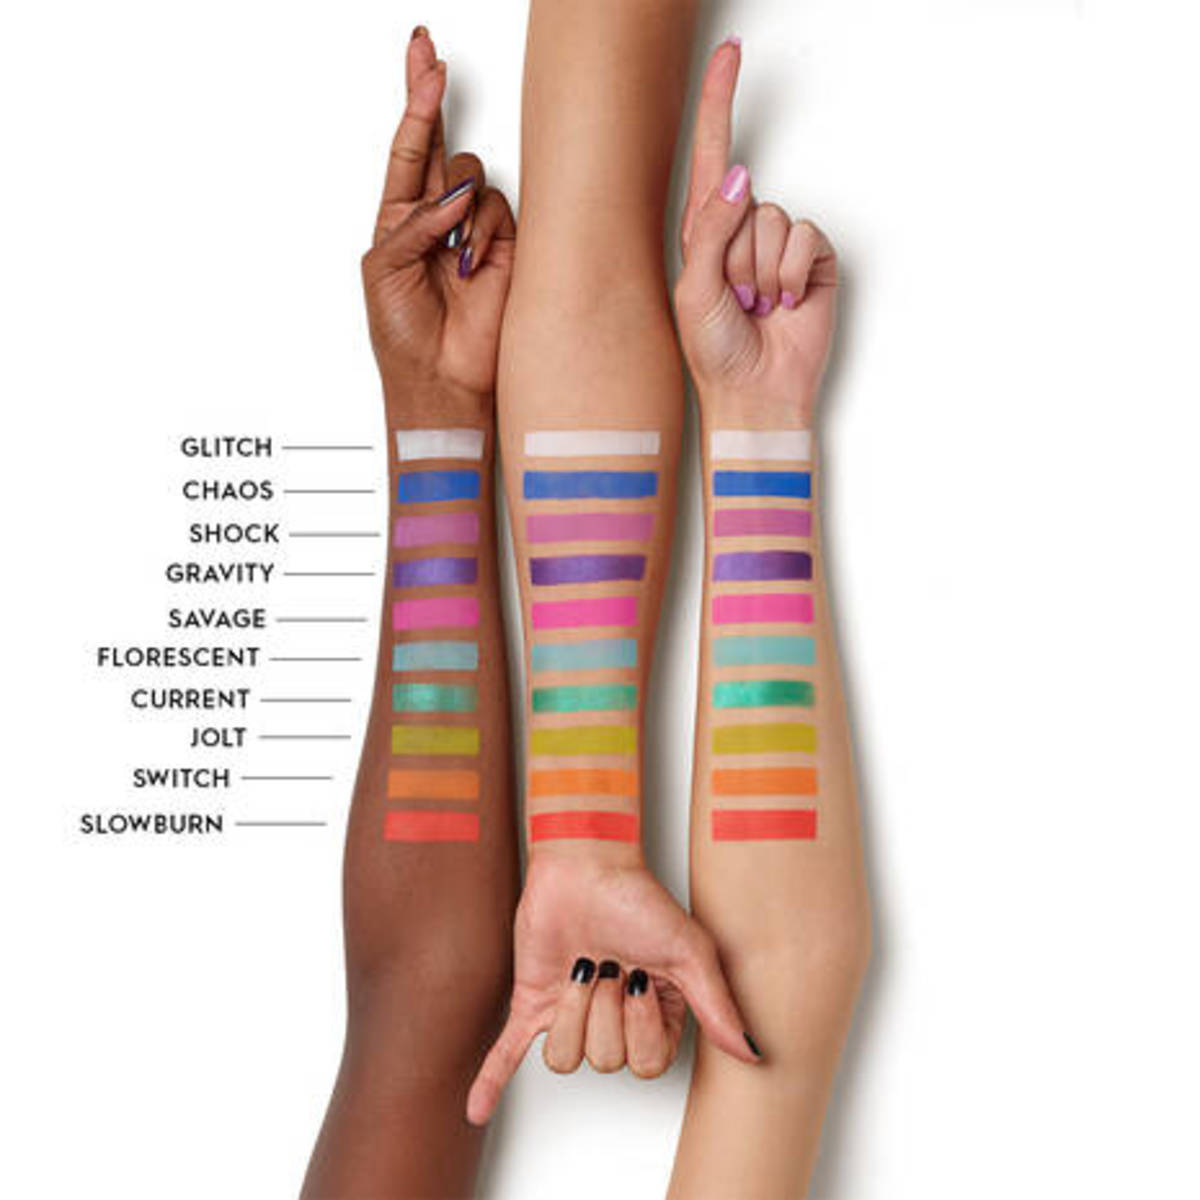 Urban Decay Wired Palette Swatches on different skin tones.